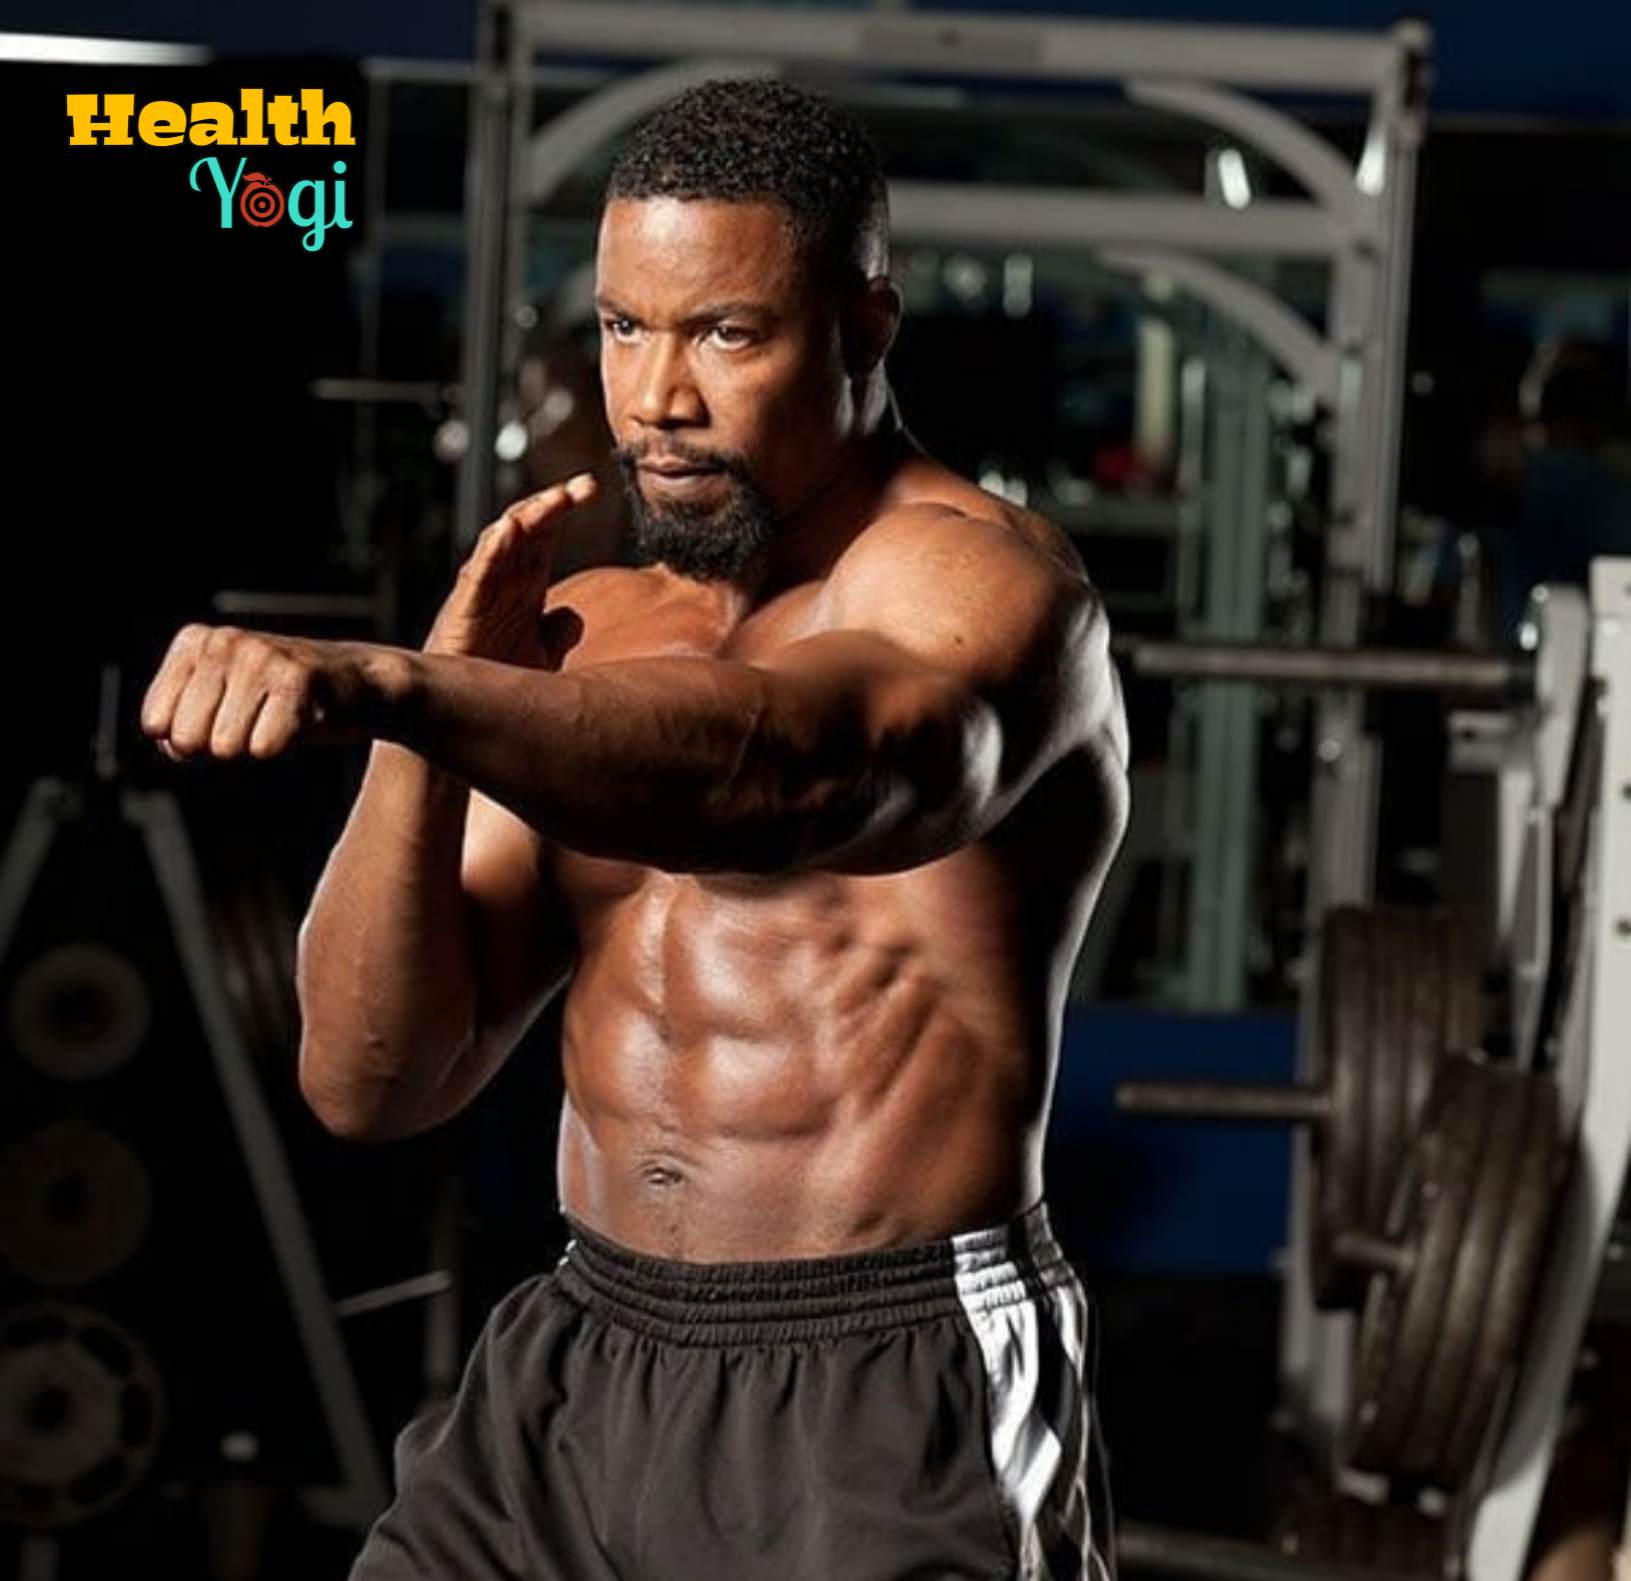 15 Minute Michael Jai White Workout Bodybuilding for Build Muscle